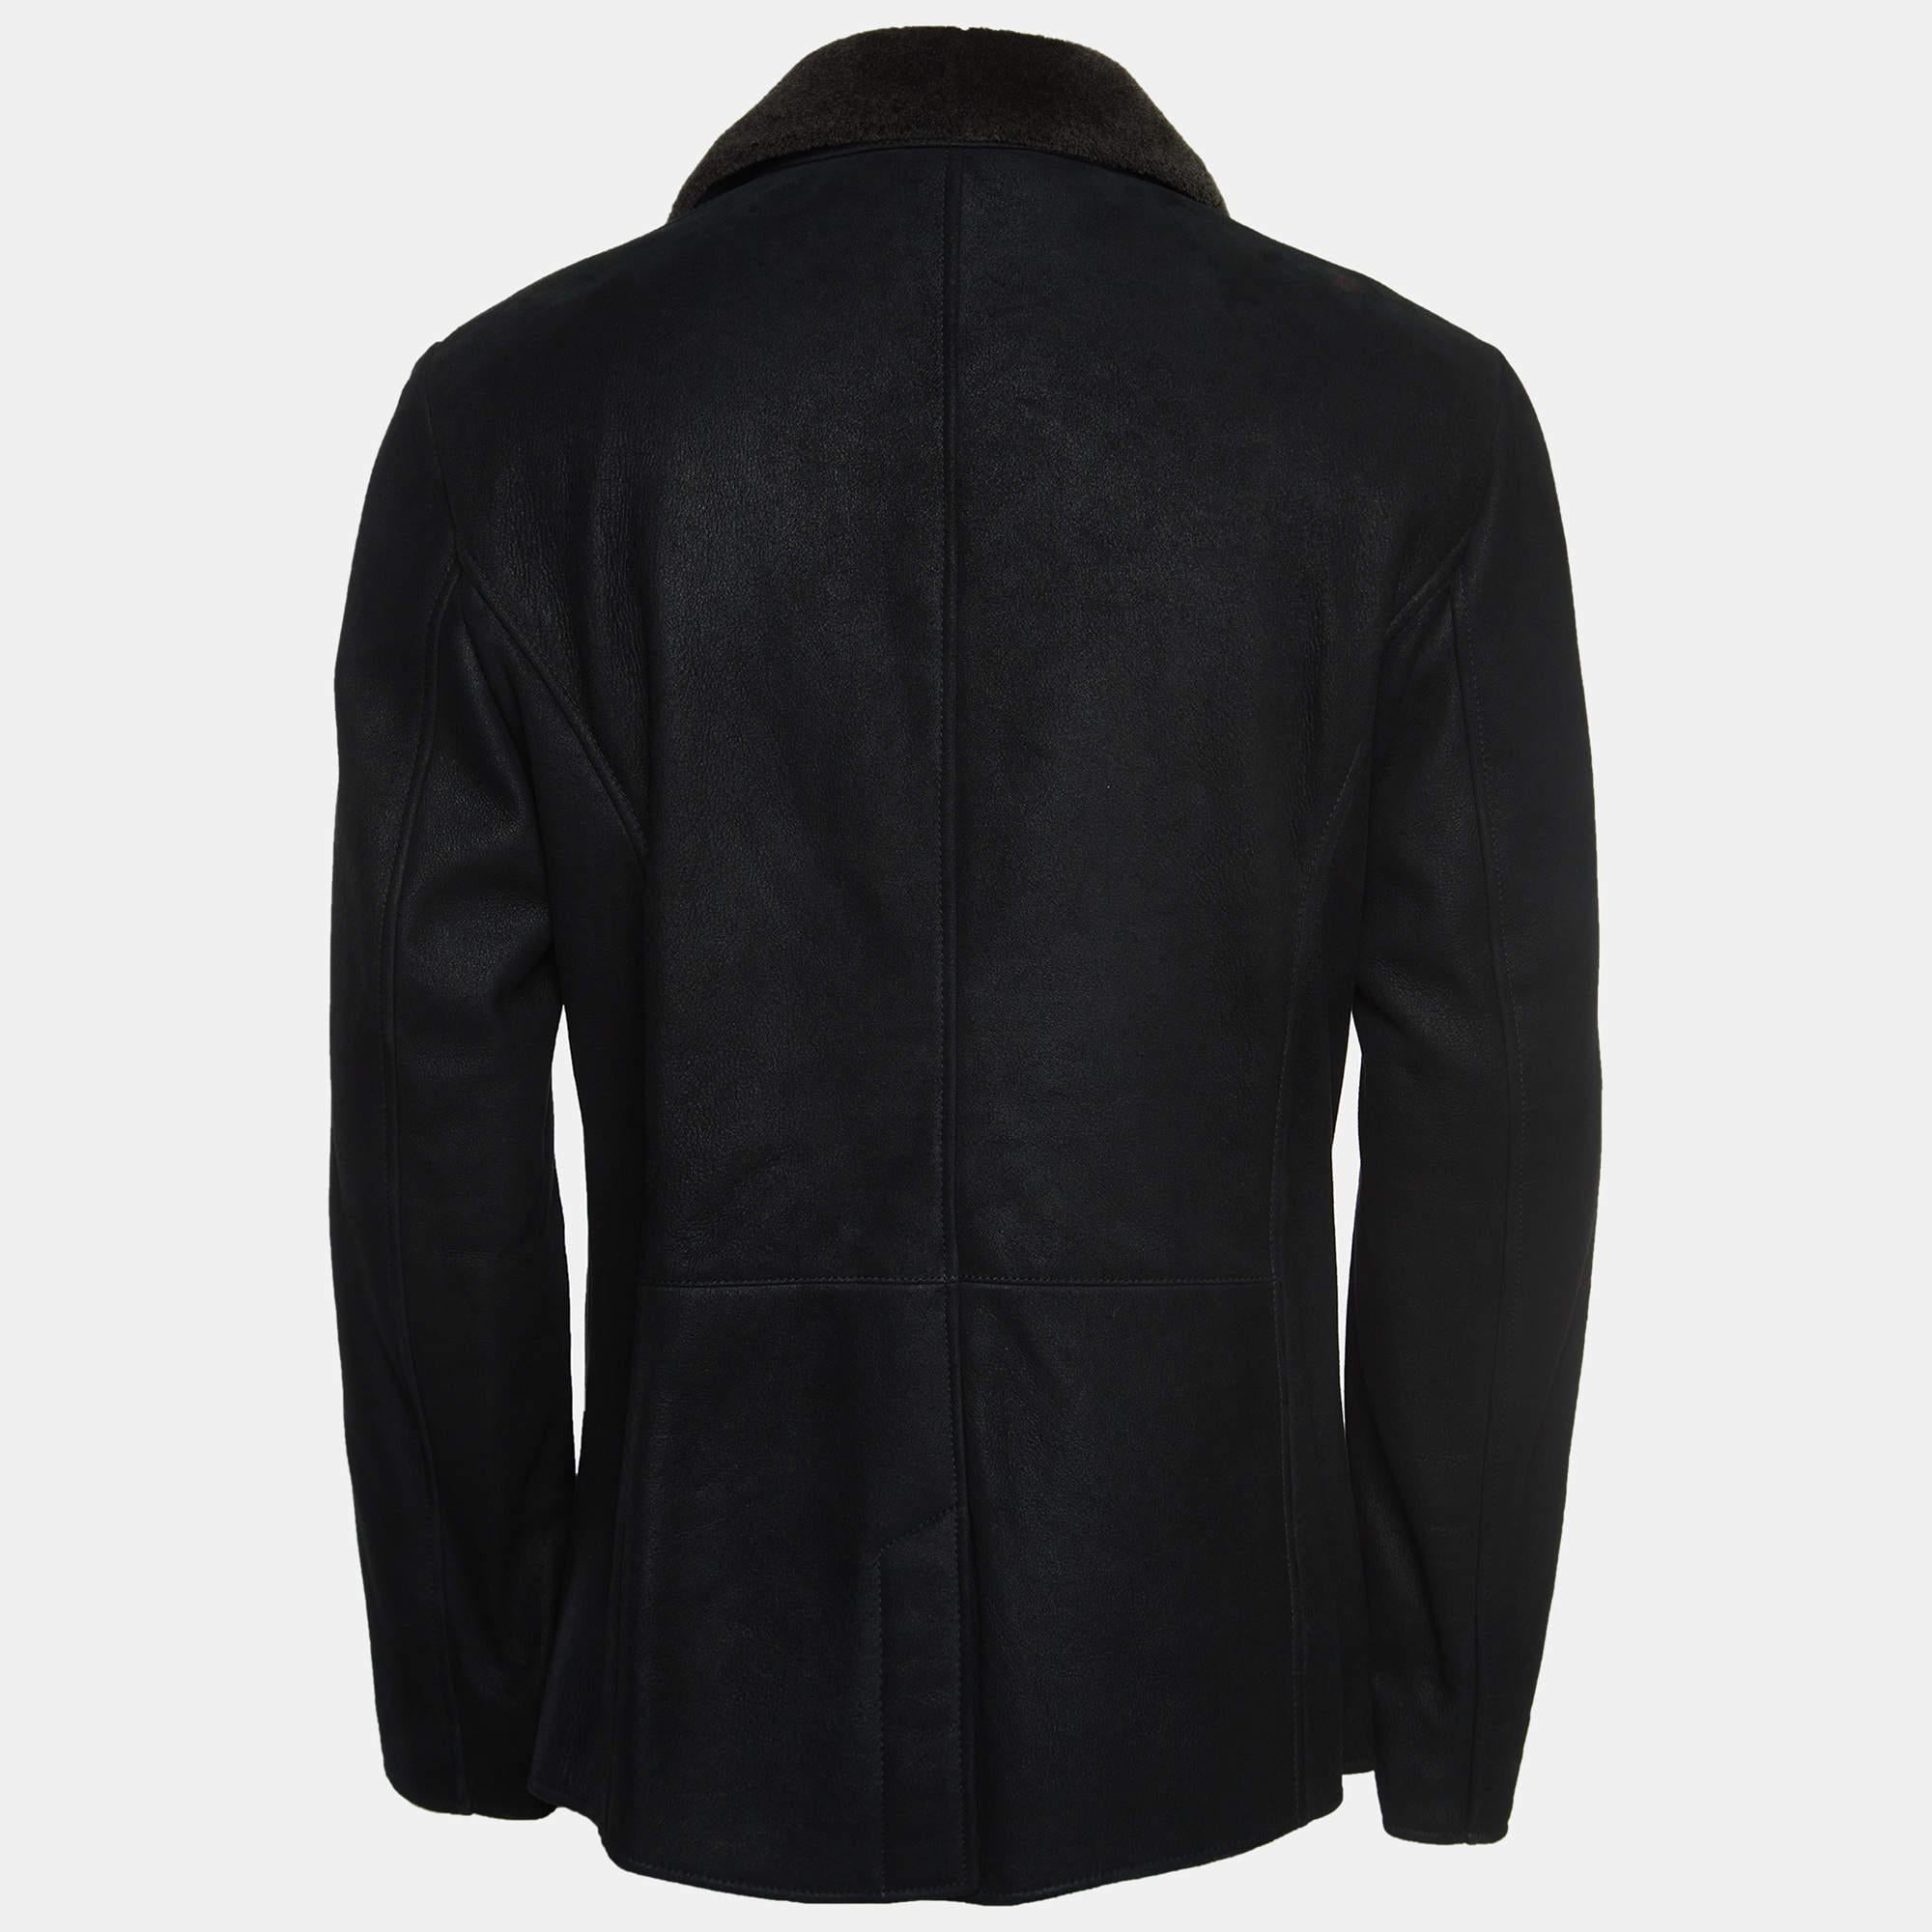 The Giorgio Armani jacket is a sleek and sophisticated outerwear piece that exudes timeless elegance. Crafted from high-quality black leather, it features a double-breasted design, emphasizing a classic yet contemporary style, making it a must-have